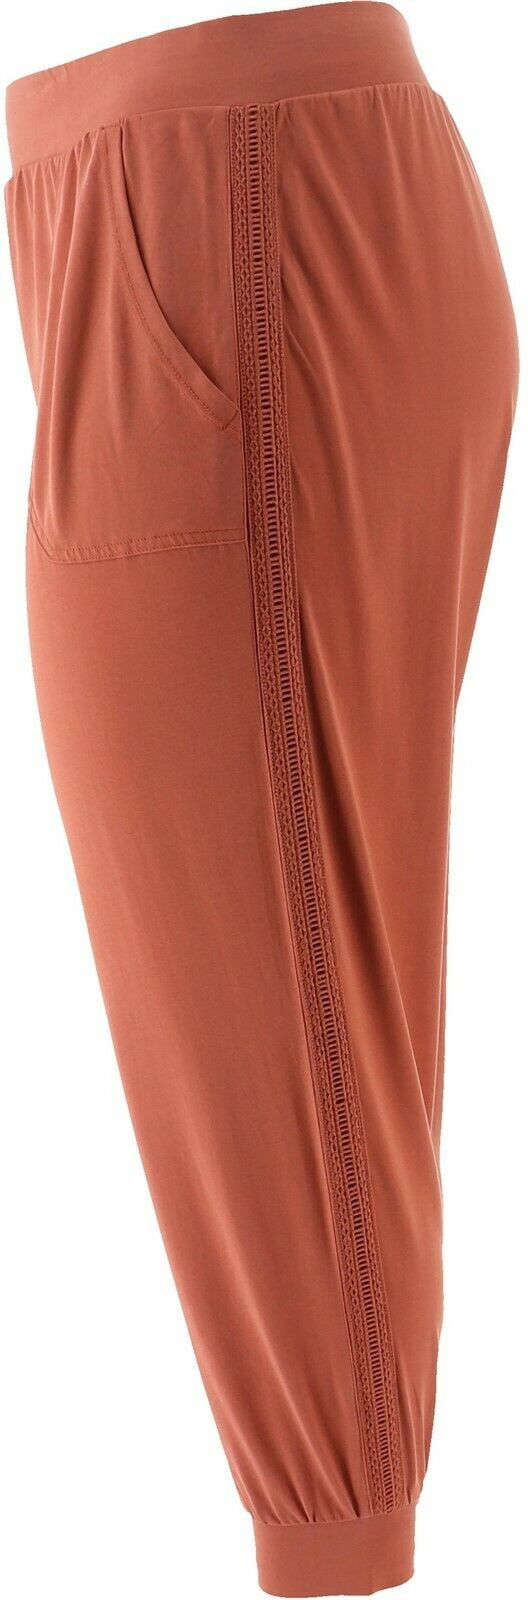 G Giuliana Luxe Knit Ankle Pant Baked Clay L Tall NEW 658-852